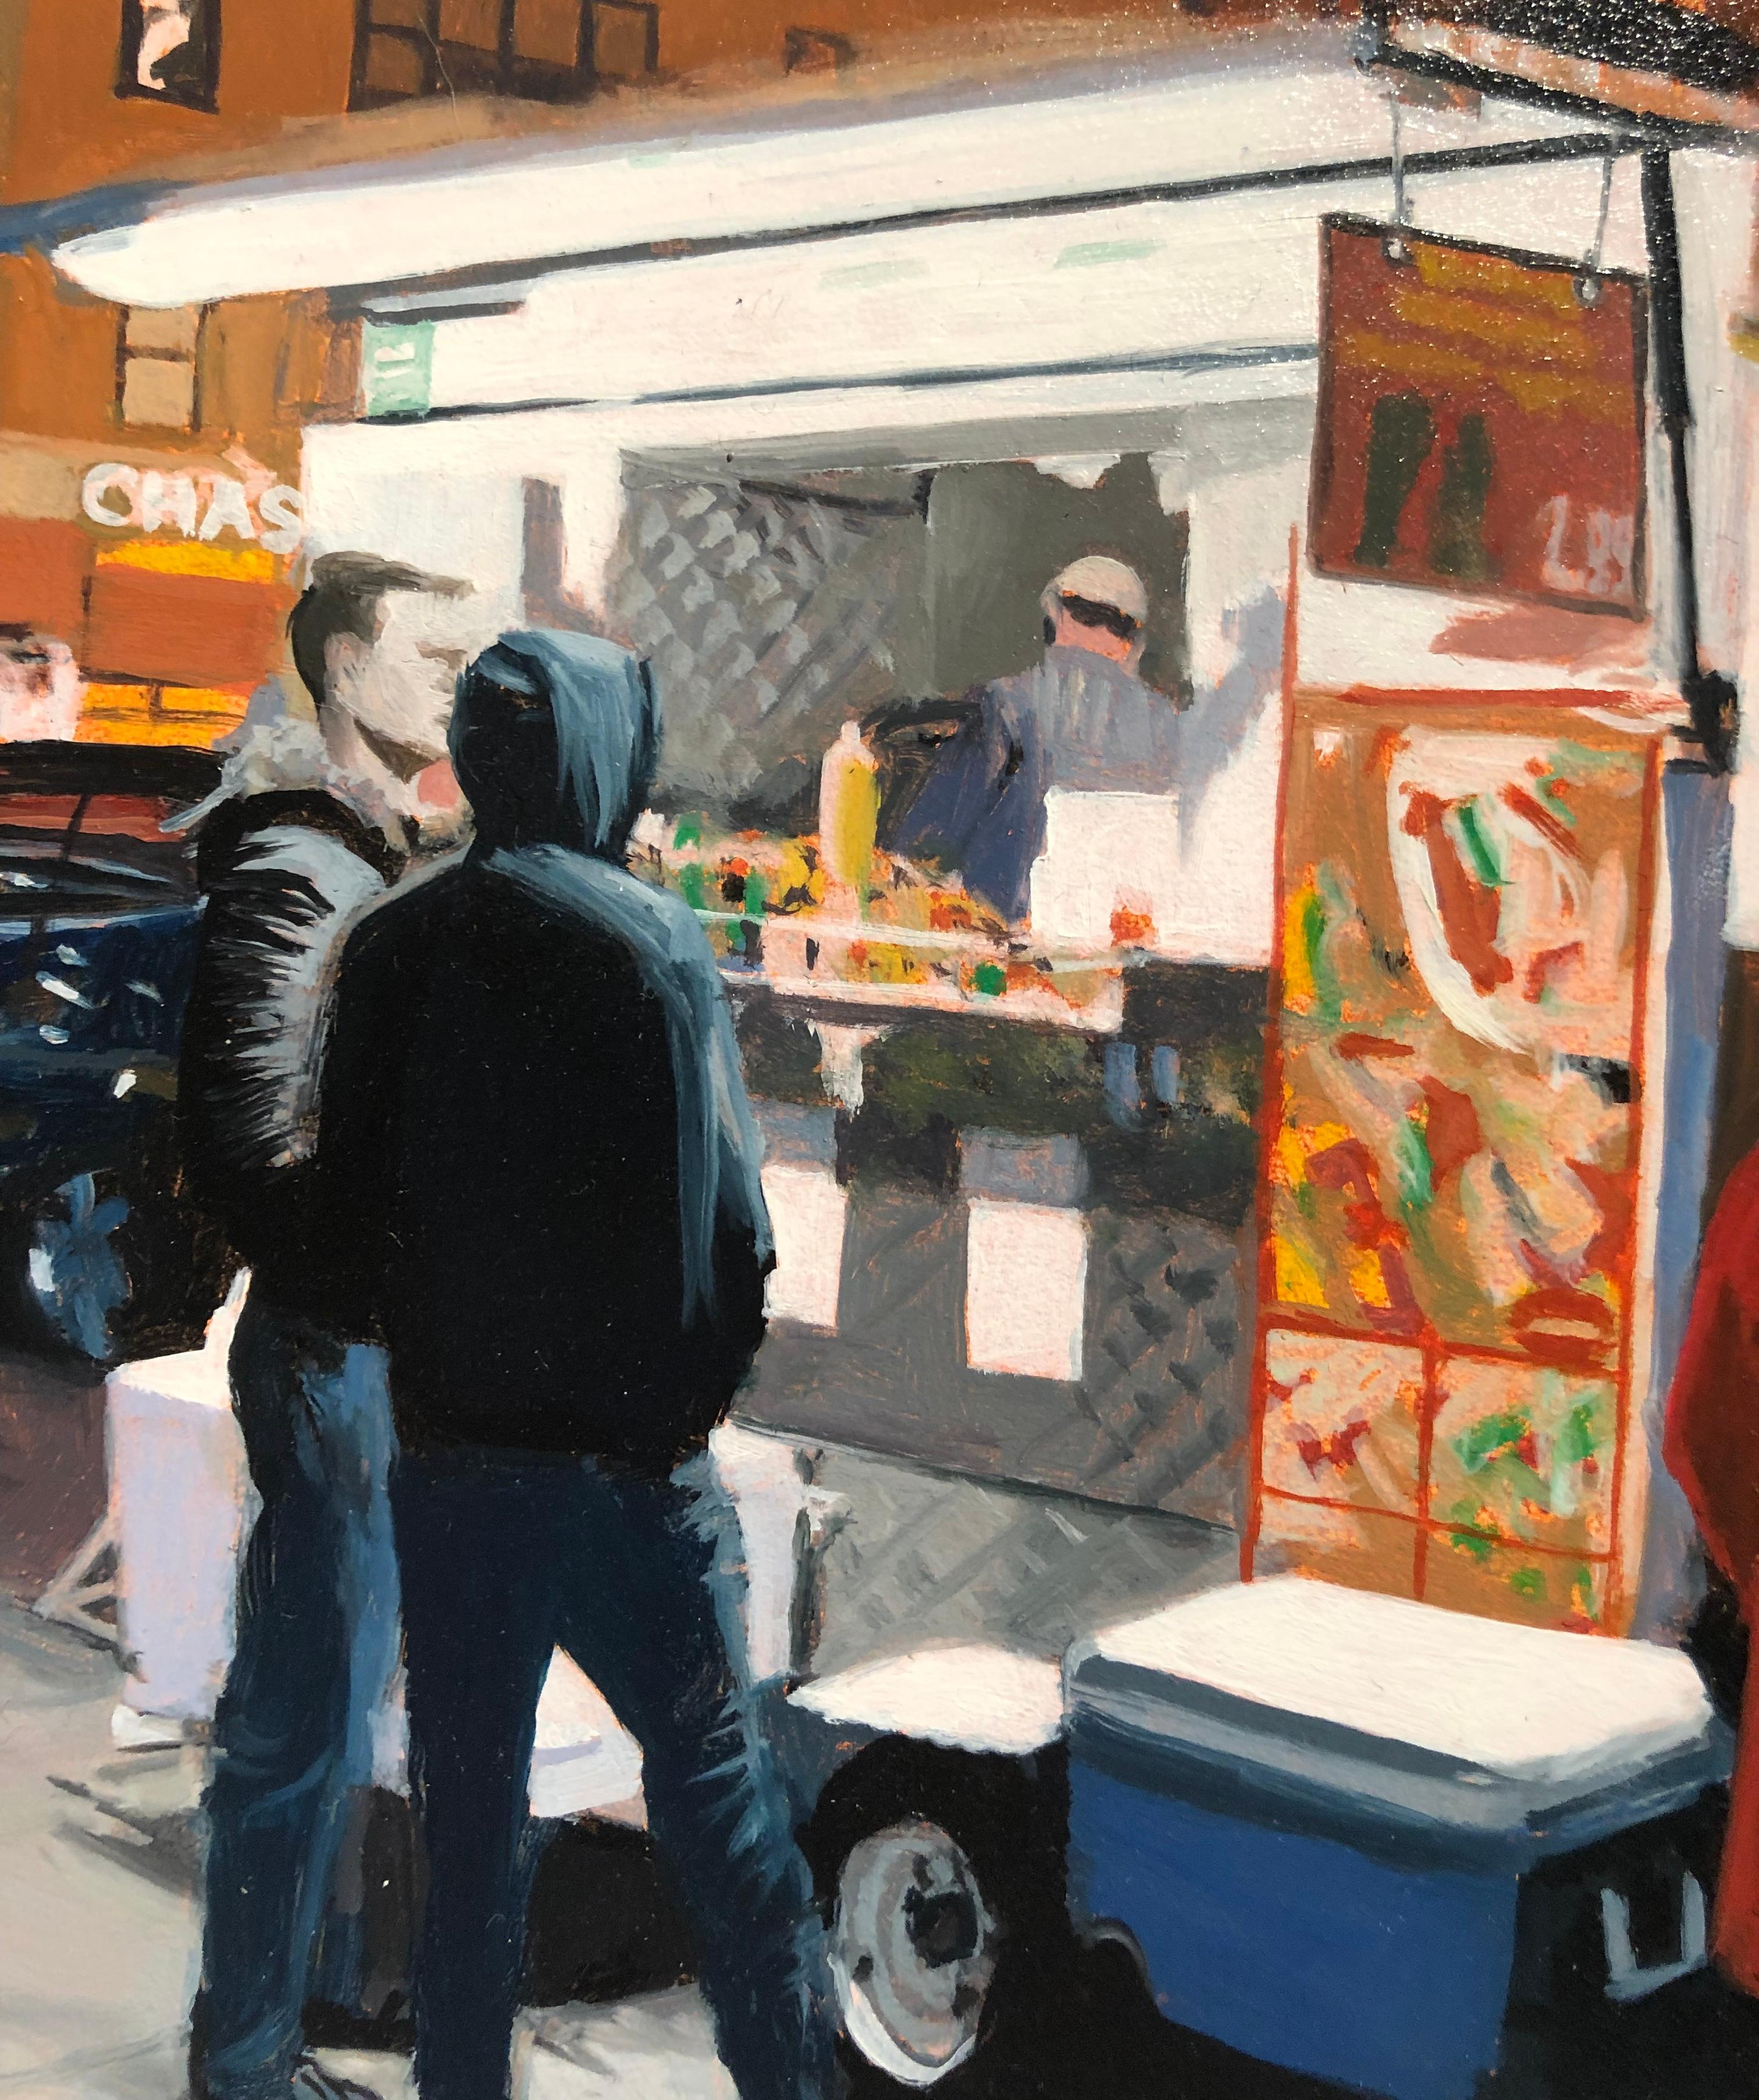 Seth Tane’s “Union Square Halal” is a small scale oil on panel painting. The work examines a New York City street corner late at night. Despite the late hour, cars drive down the street and people flock around a Halal cart. With this painting, Tane